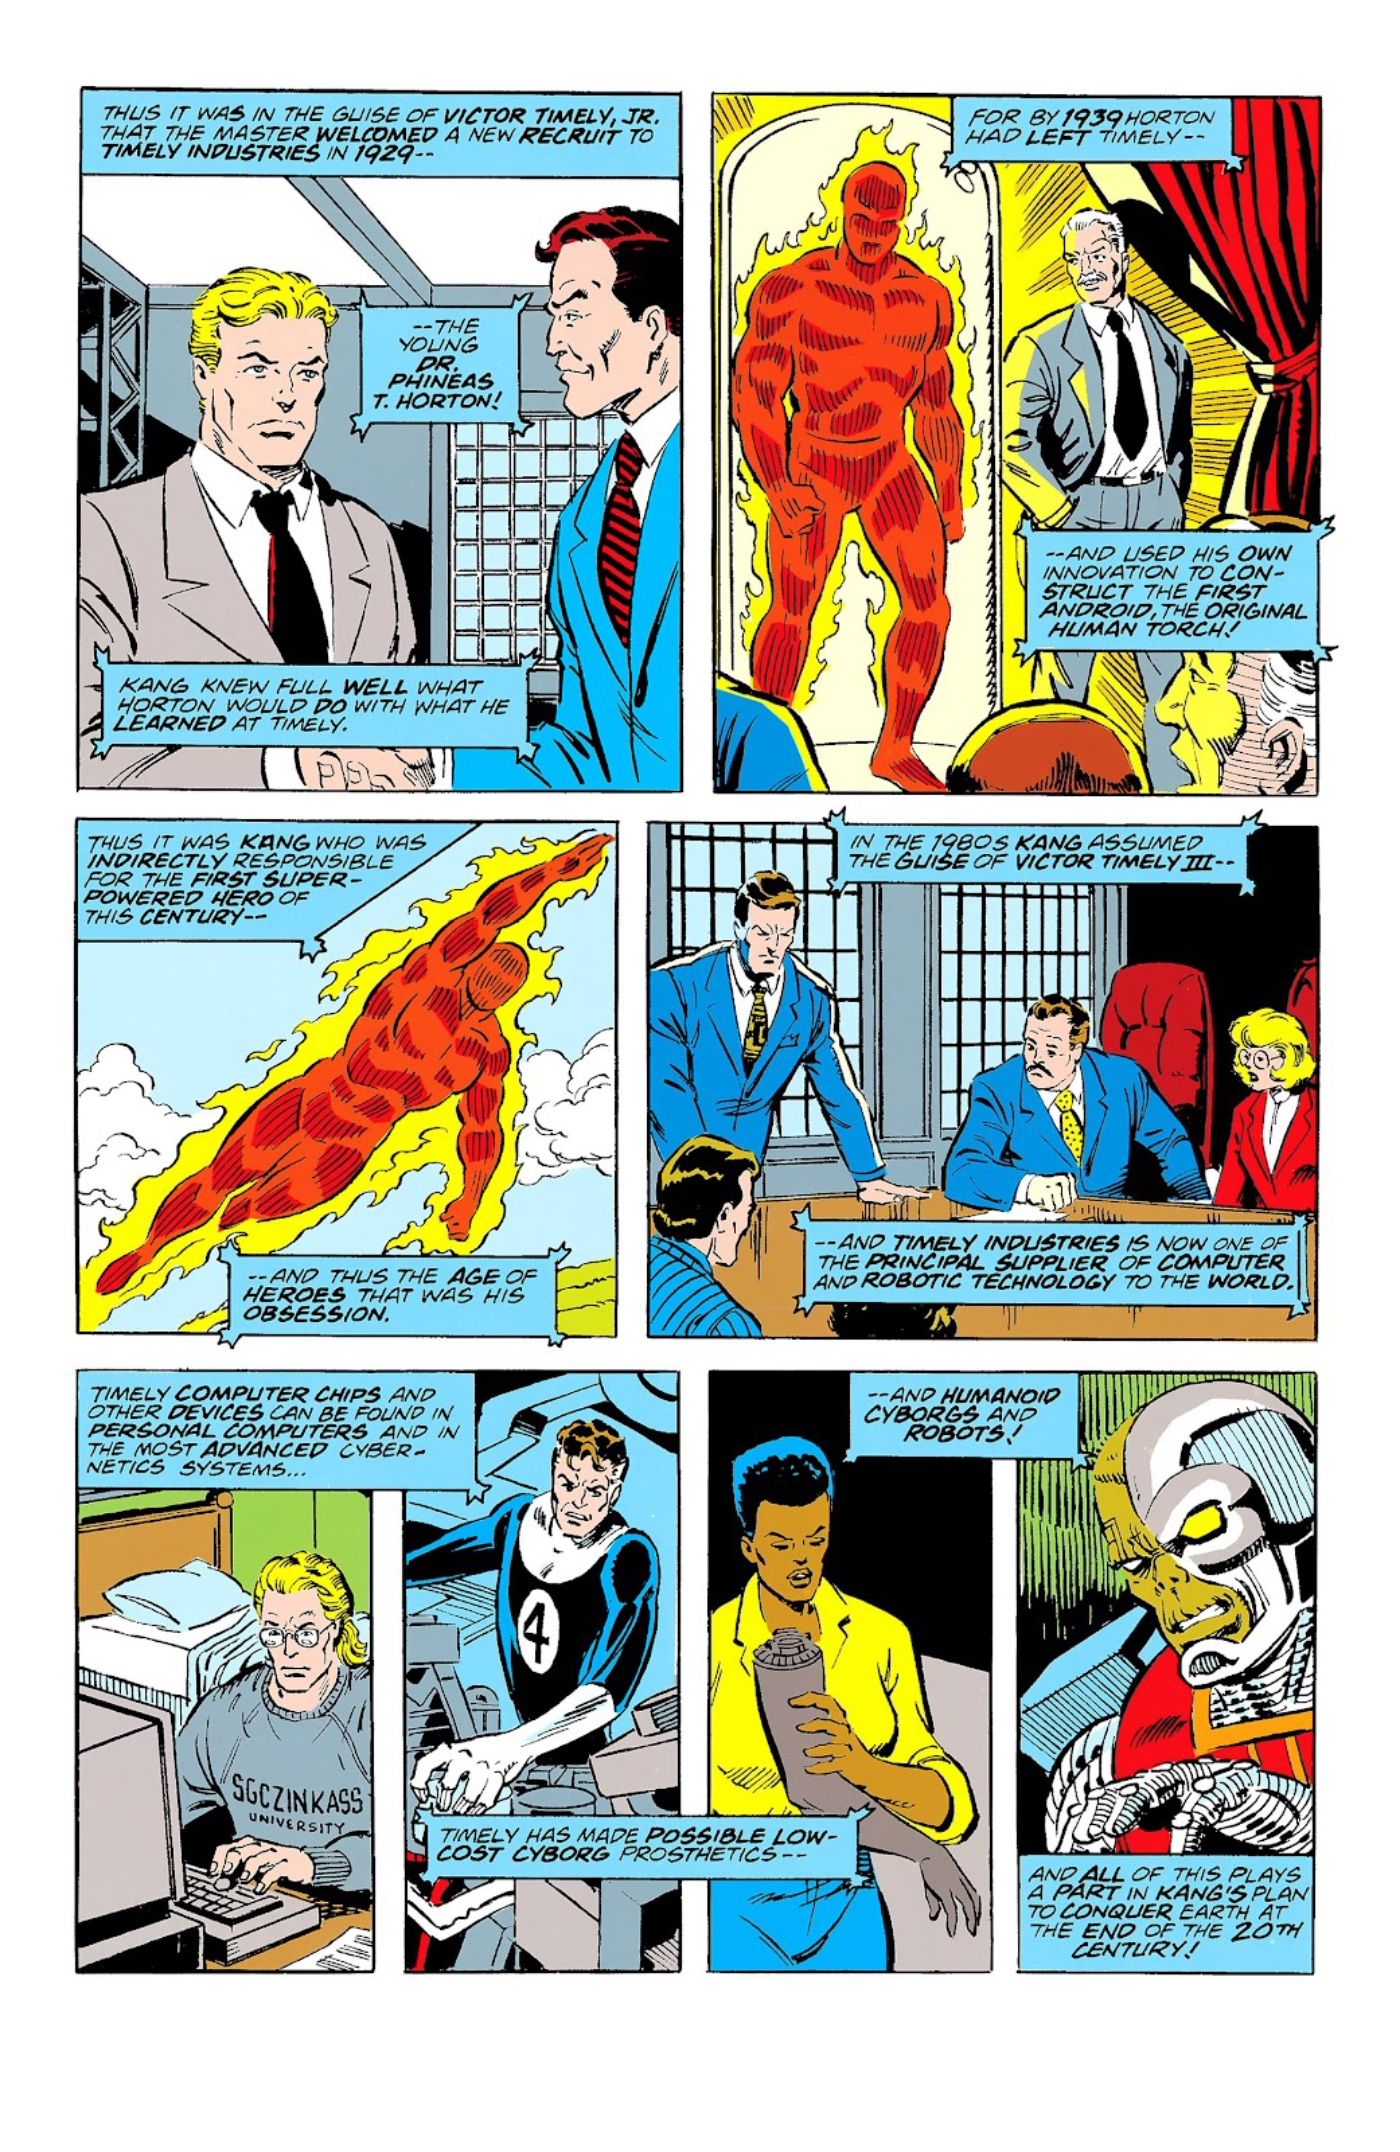 Kang the Conqueror is indirectly responsible for the Human Torch